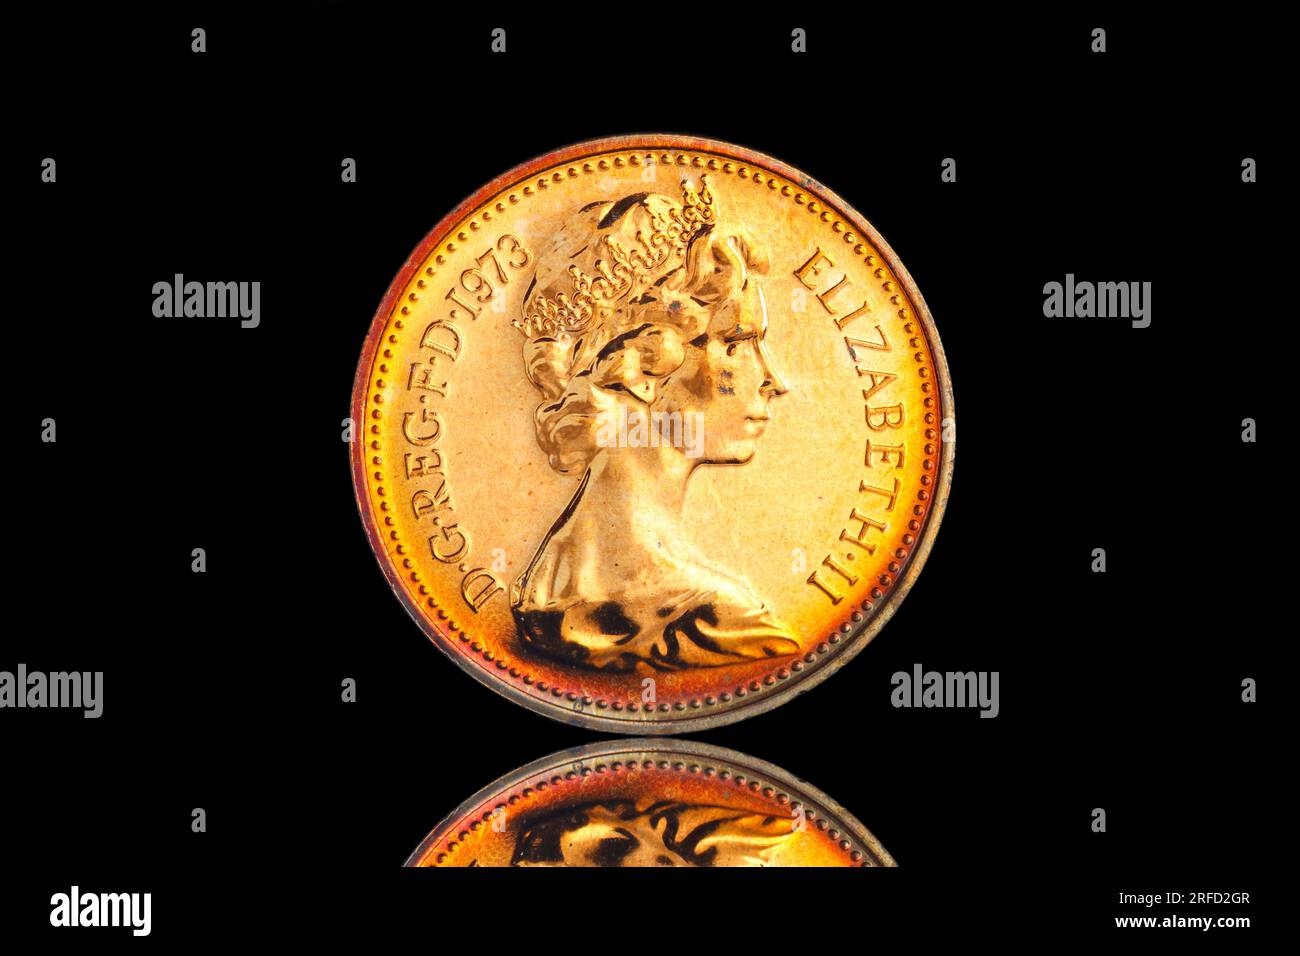 2nd coin portrait of the late Queen Elizabeth II by Mary Gillick Stock Photo